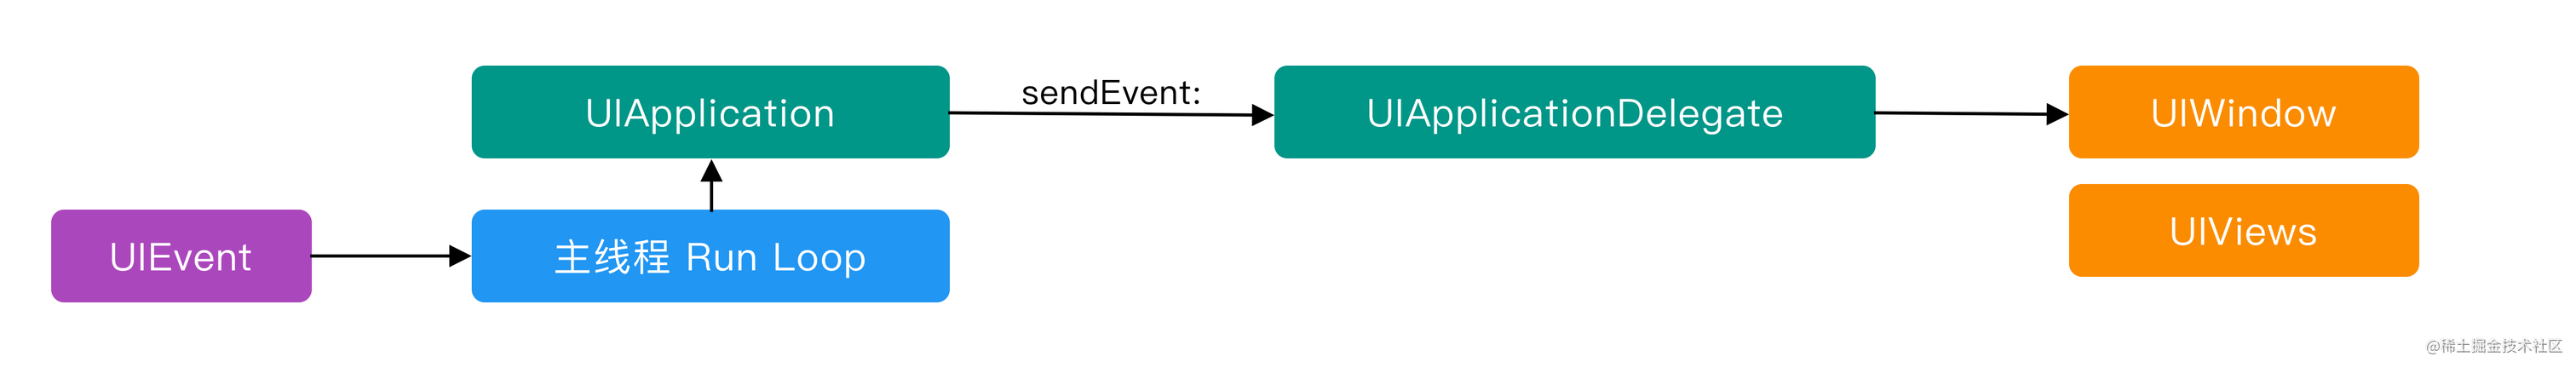 UIApplicationPipeline.png